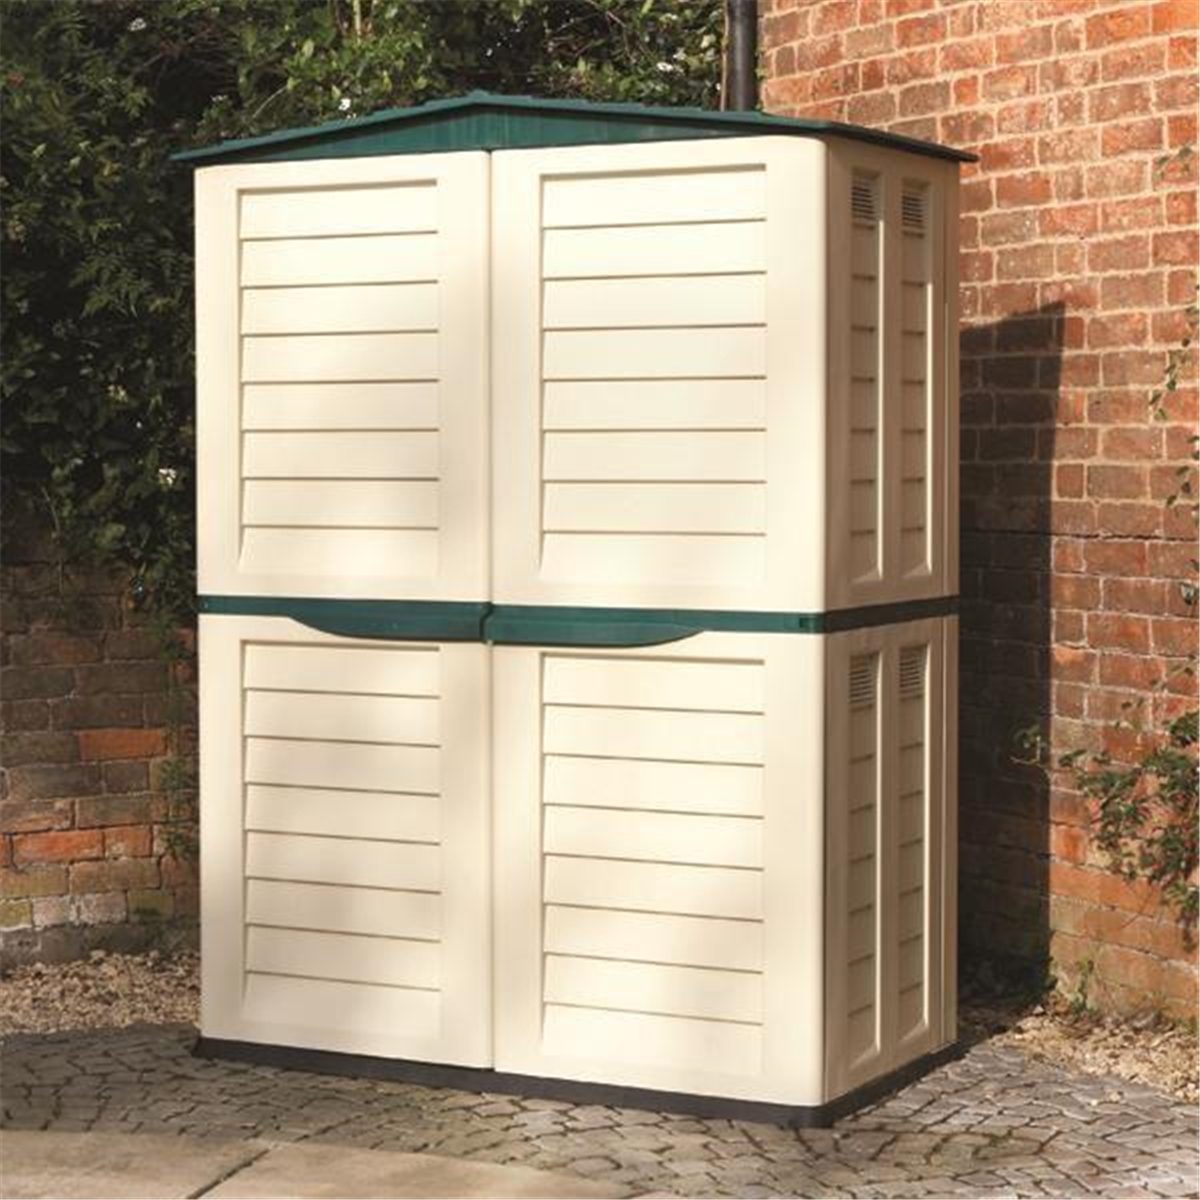 5 x 3 Deluxe Plastic Tall Shed (1.51m x 0.83m) | HomeBerry